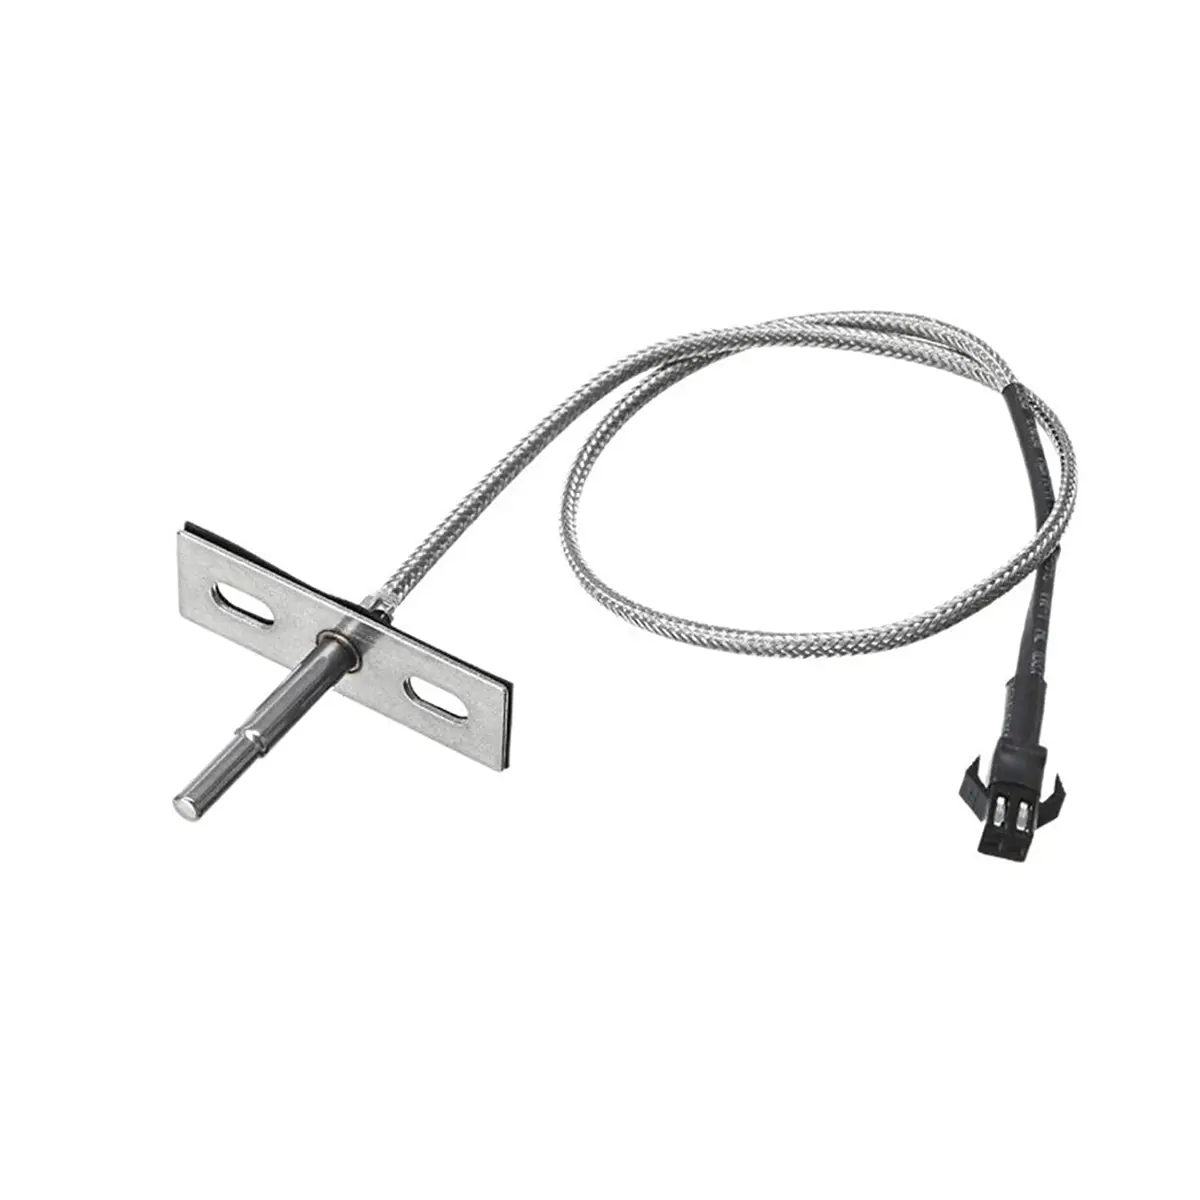 RTD Temperature Probe Sensor Grill Parts, Compatible with Pit Boss P7  Series